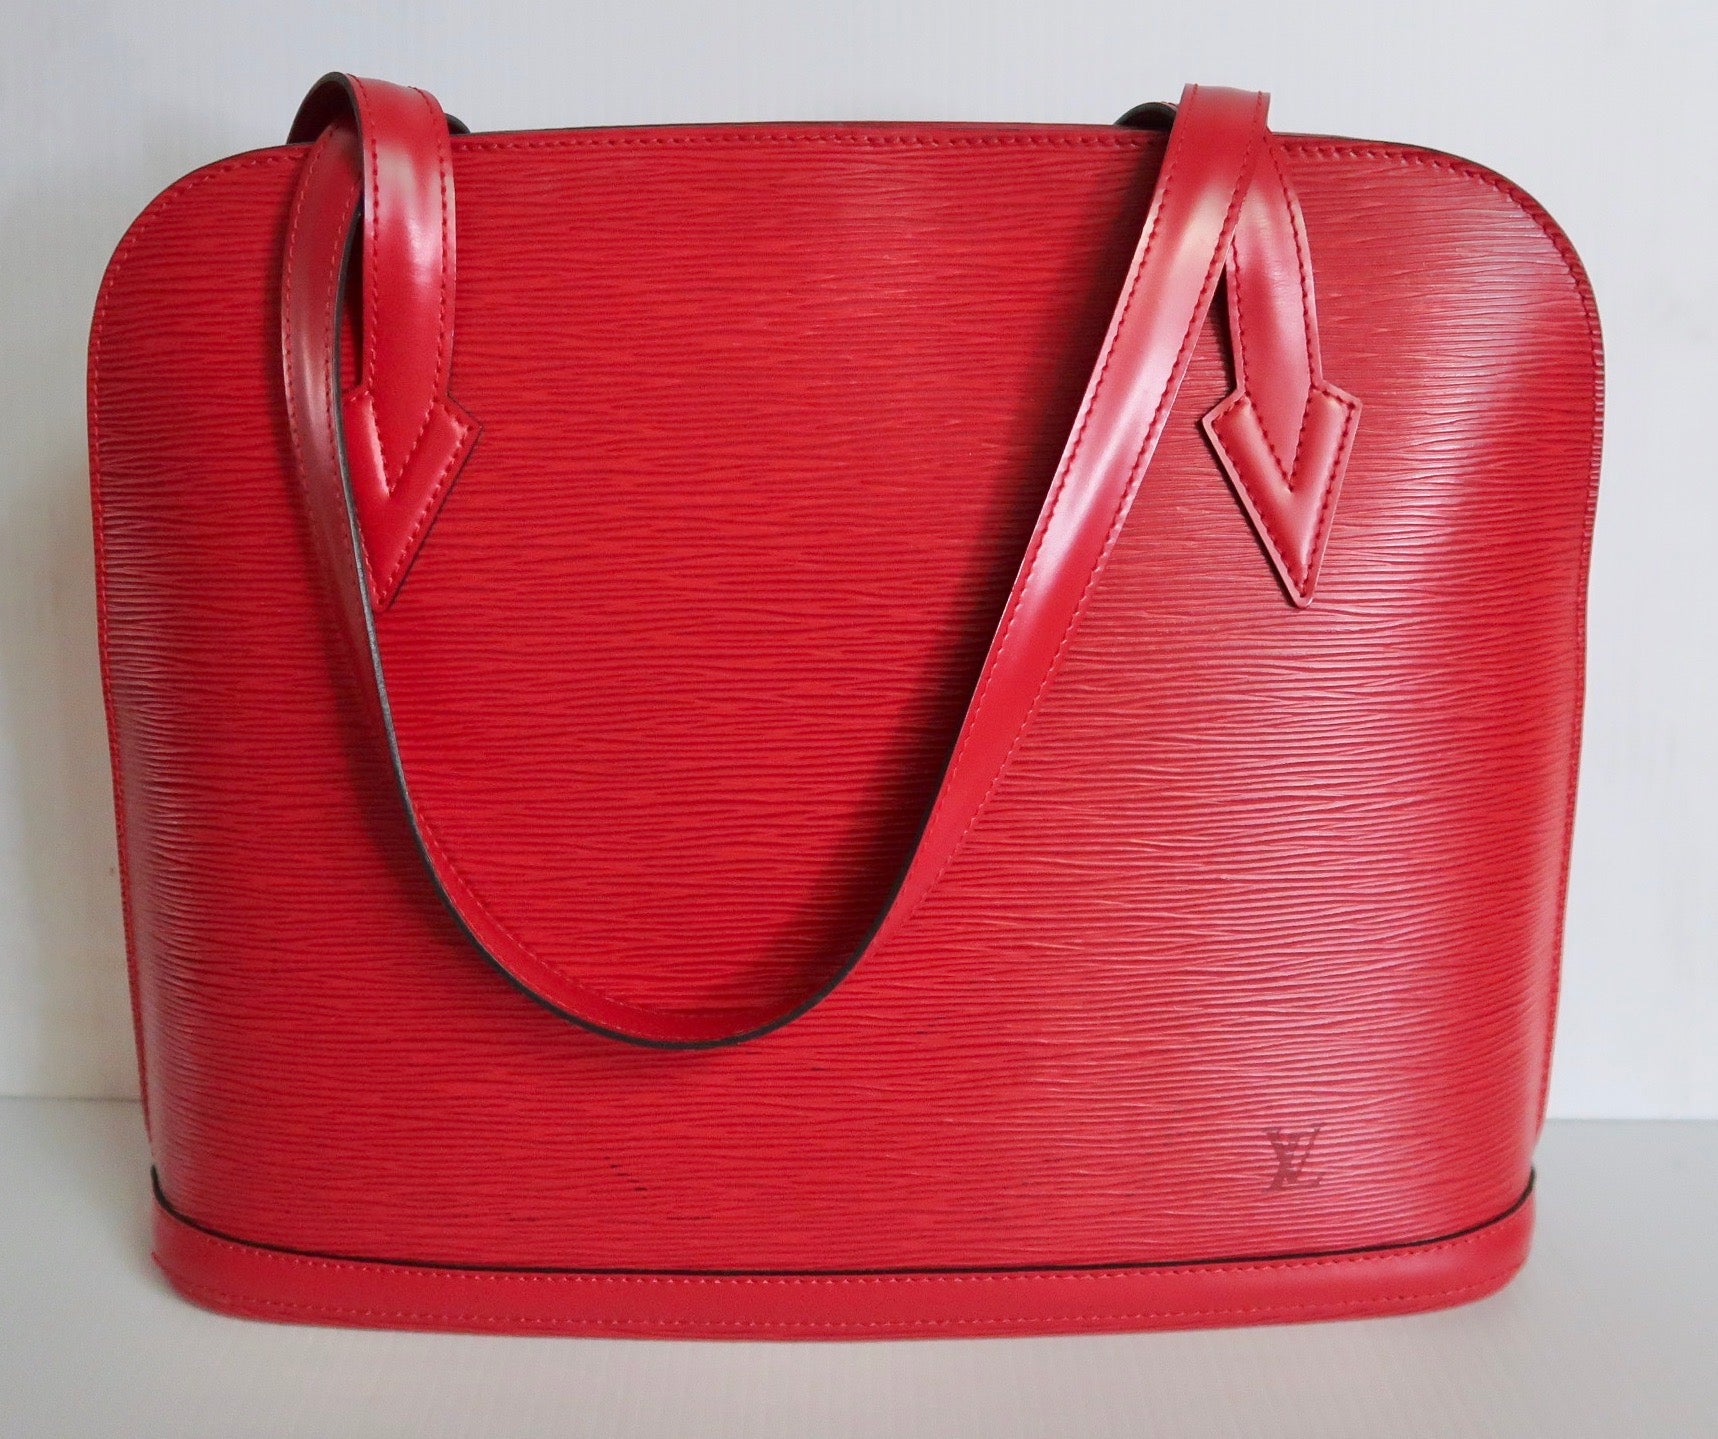 lv red leather bag